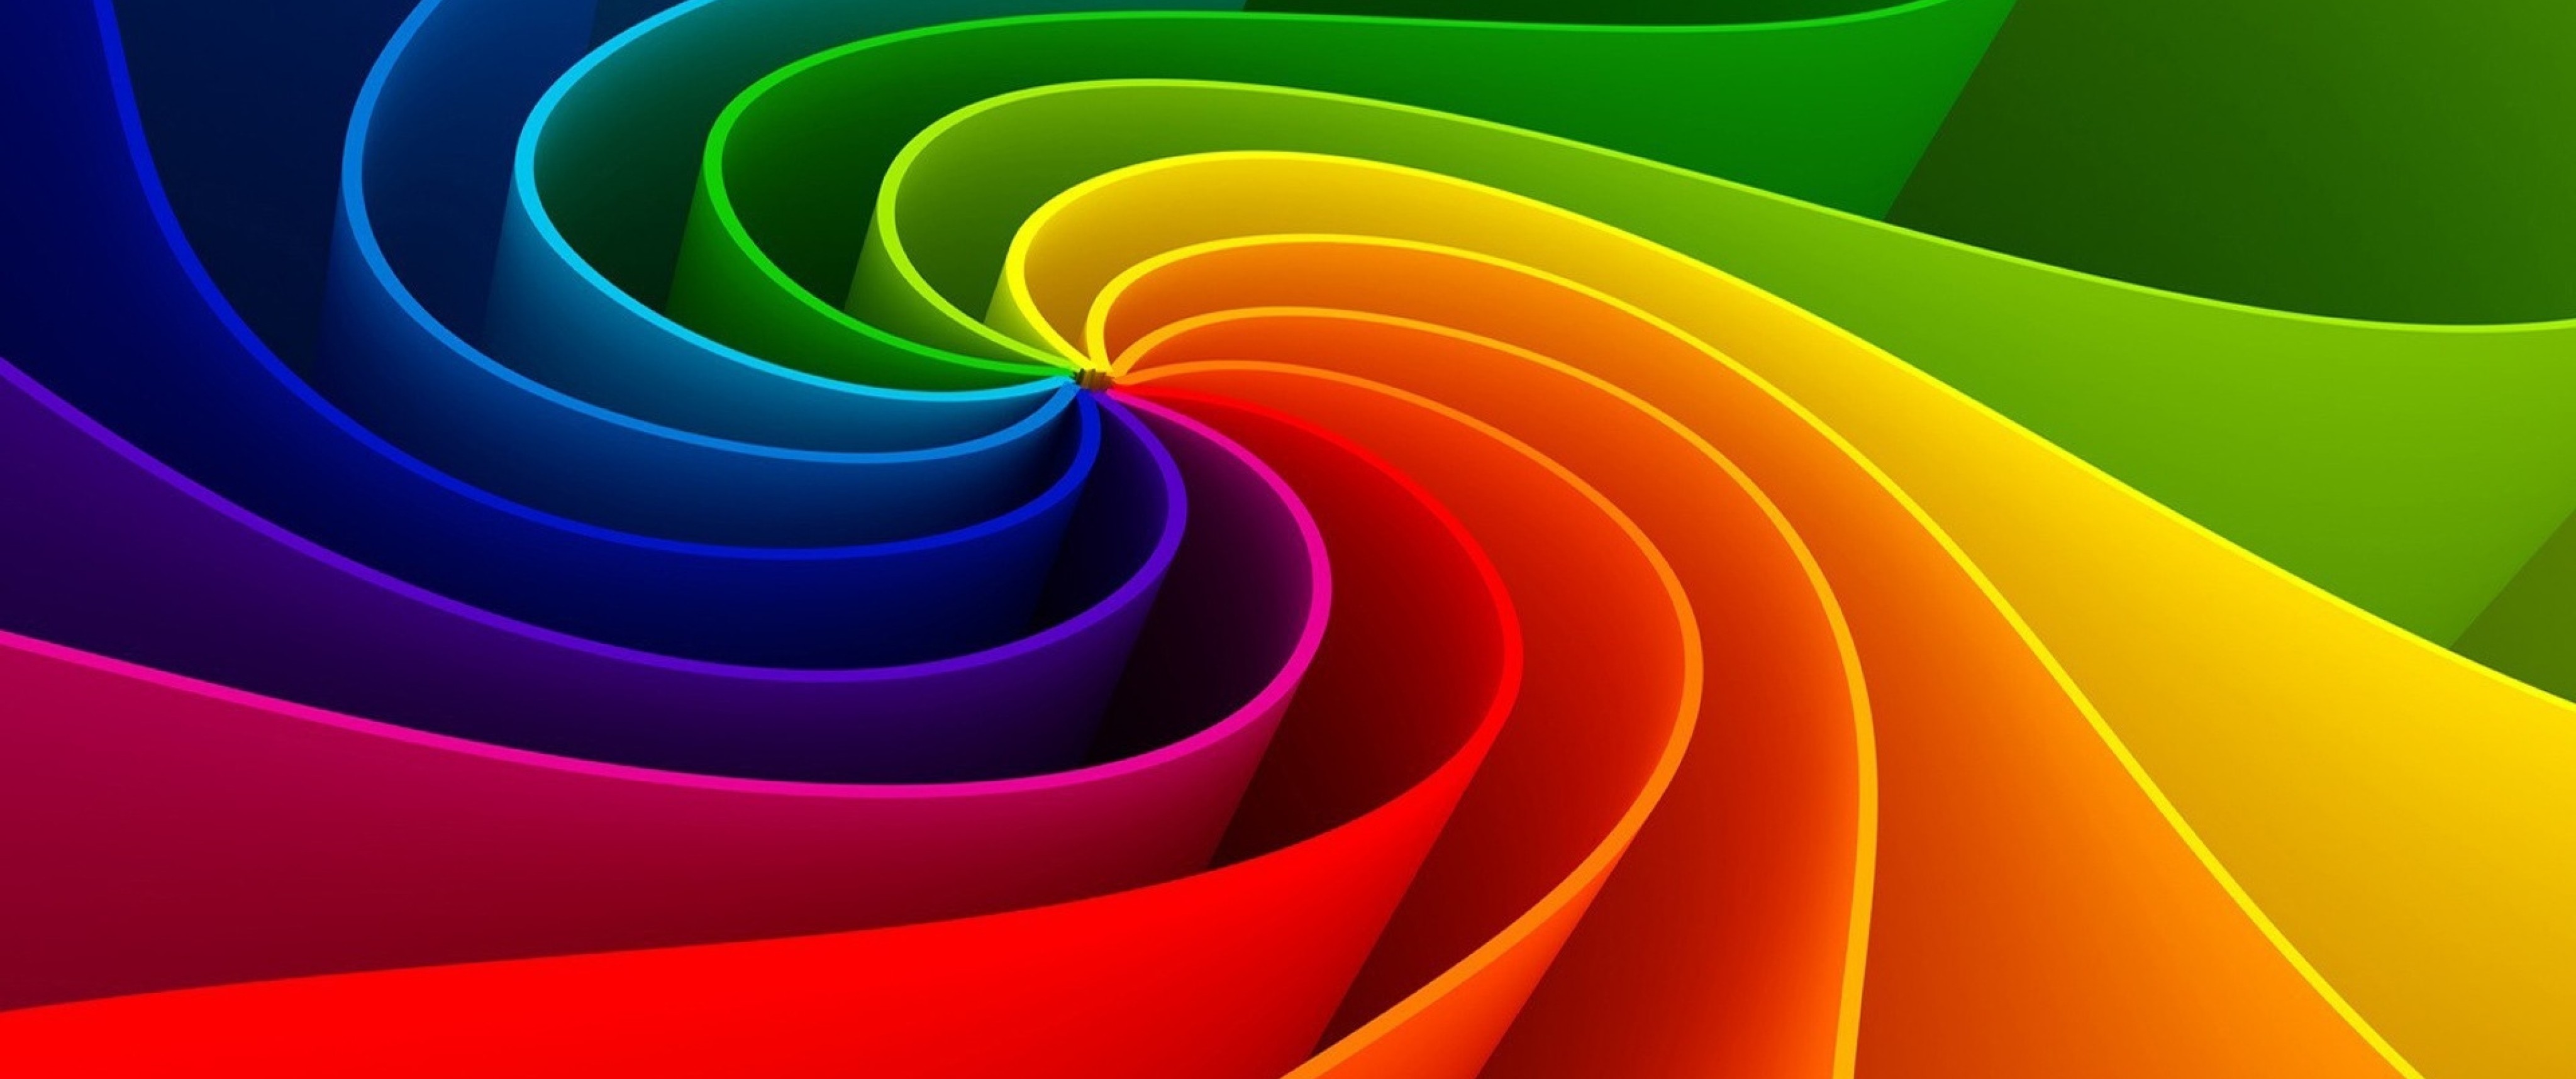 Colourful Rainbow Coloured Swirl Wallpaper Backround 4K Cropped